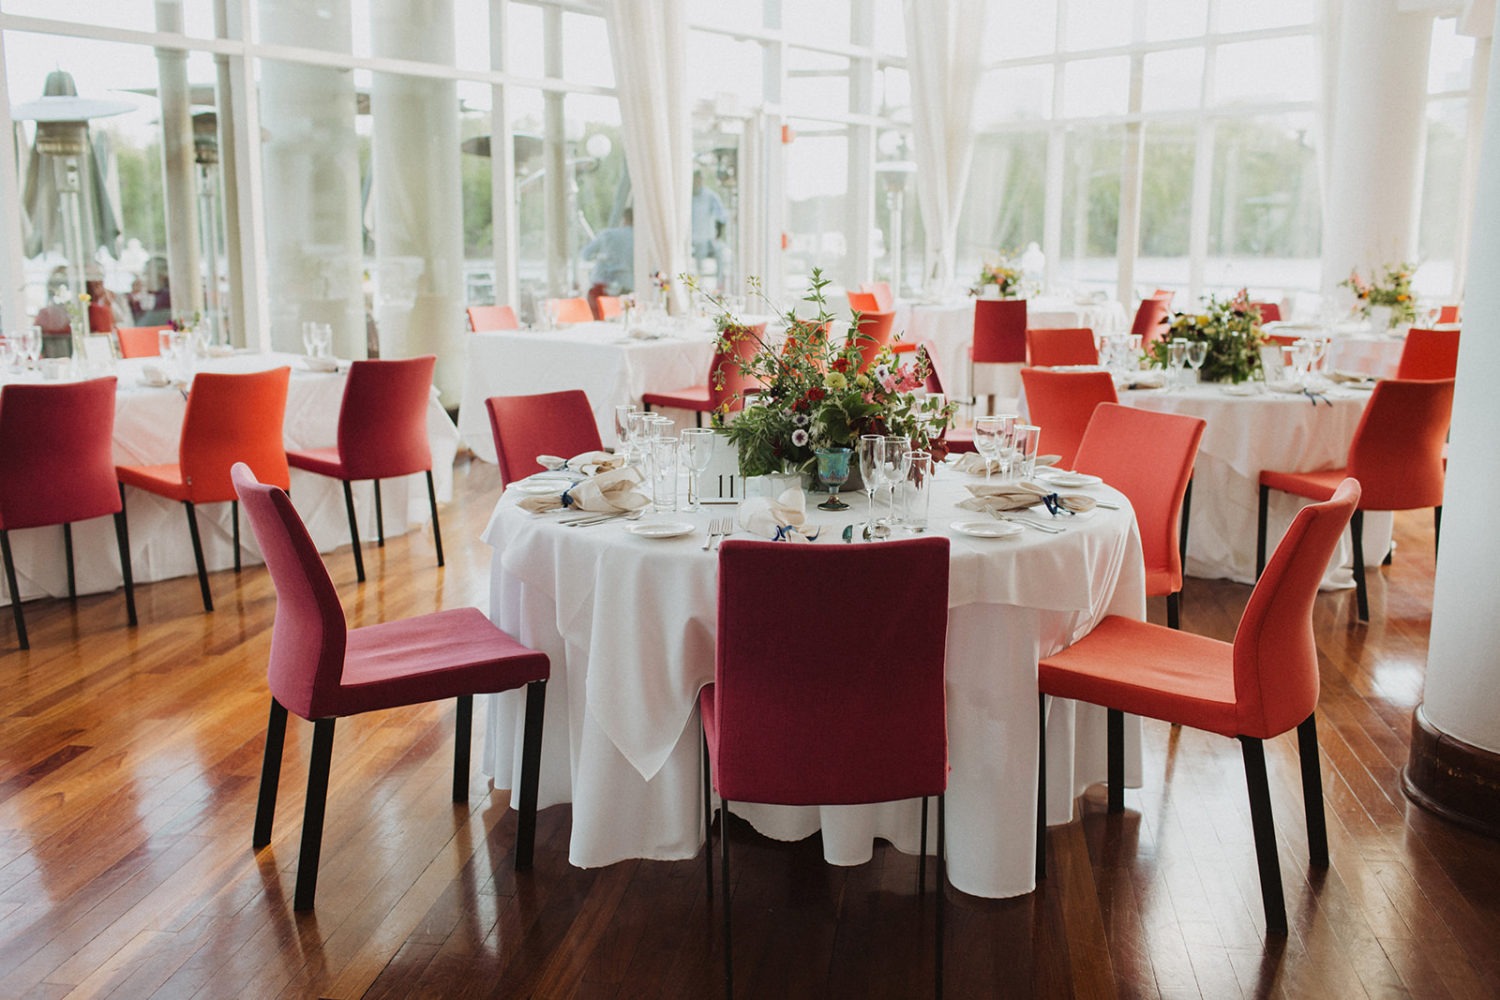 Table settings and florals on tables at Sequoia Restaurant wedding reception 